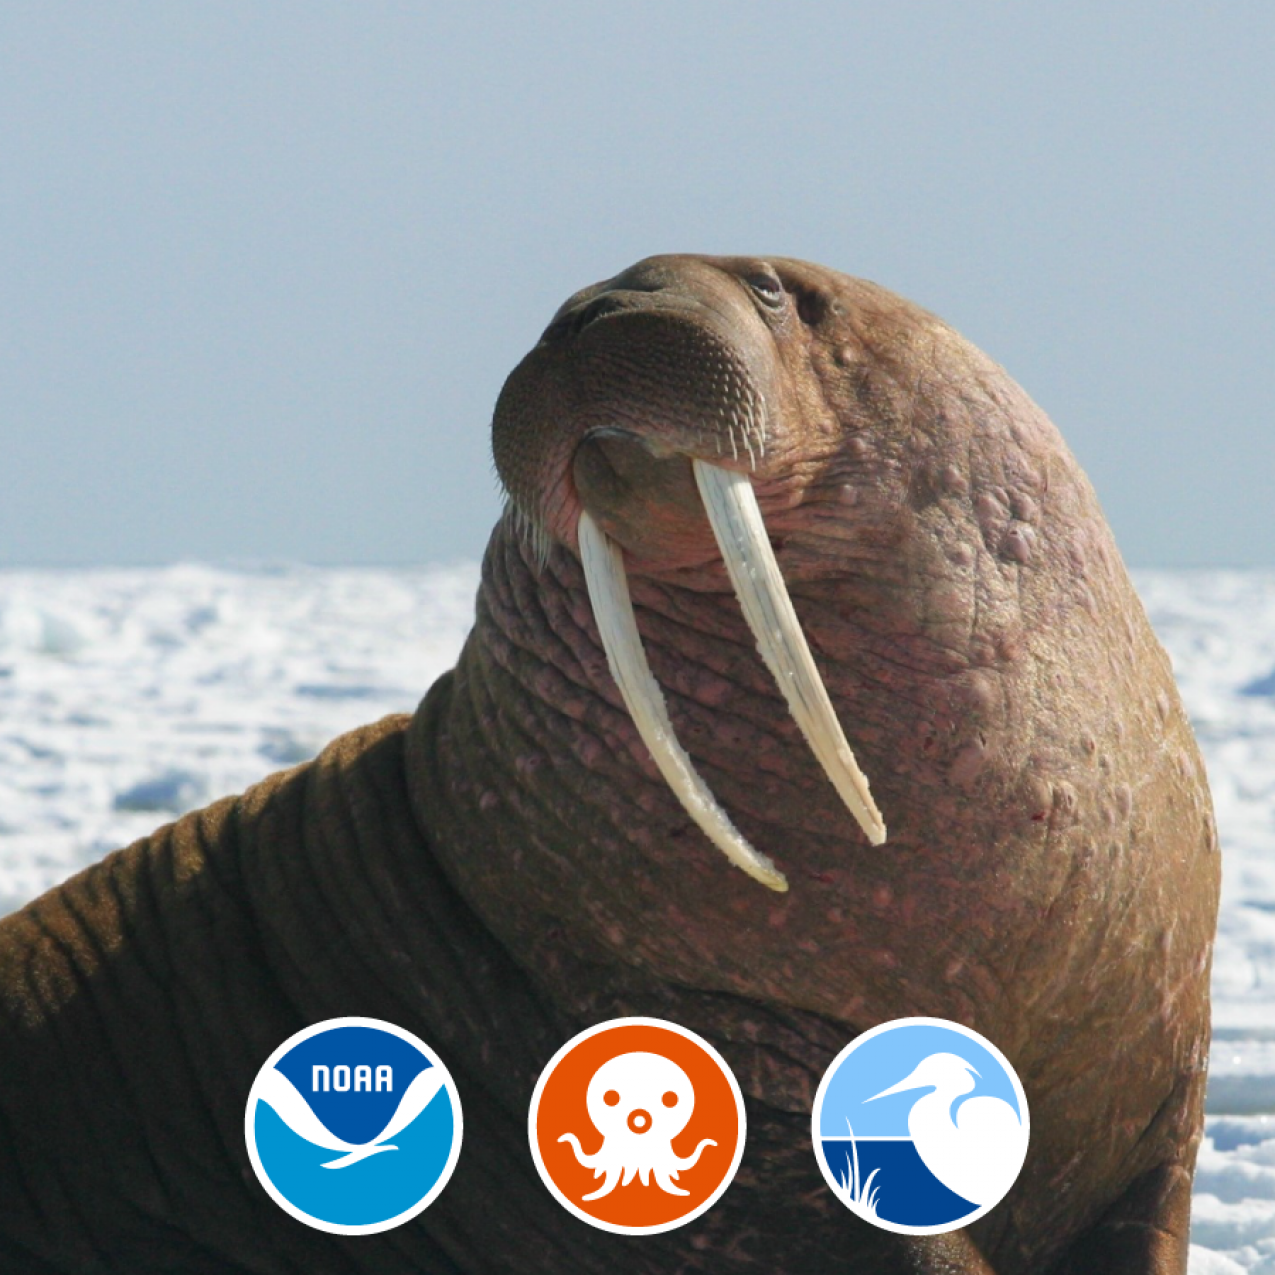 Episode 3: The Walrus Chief
Enter the world of walruses with the Alaska SeaLife Center as your guide! Learn about their hierarchy, their amazing multi-use tusks, and their need for protection.